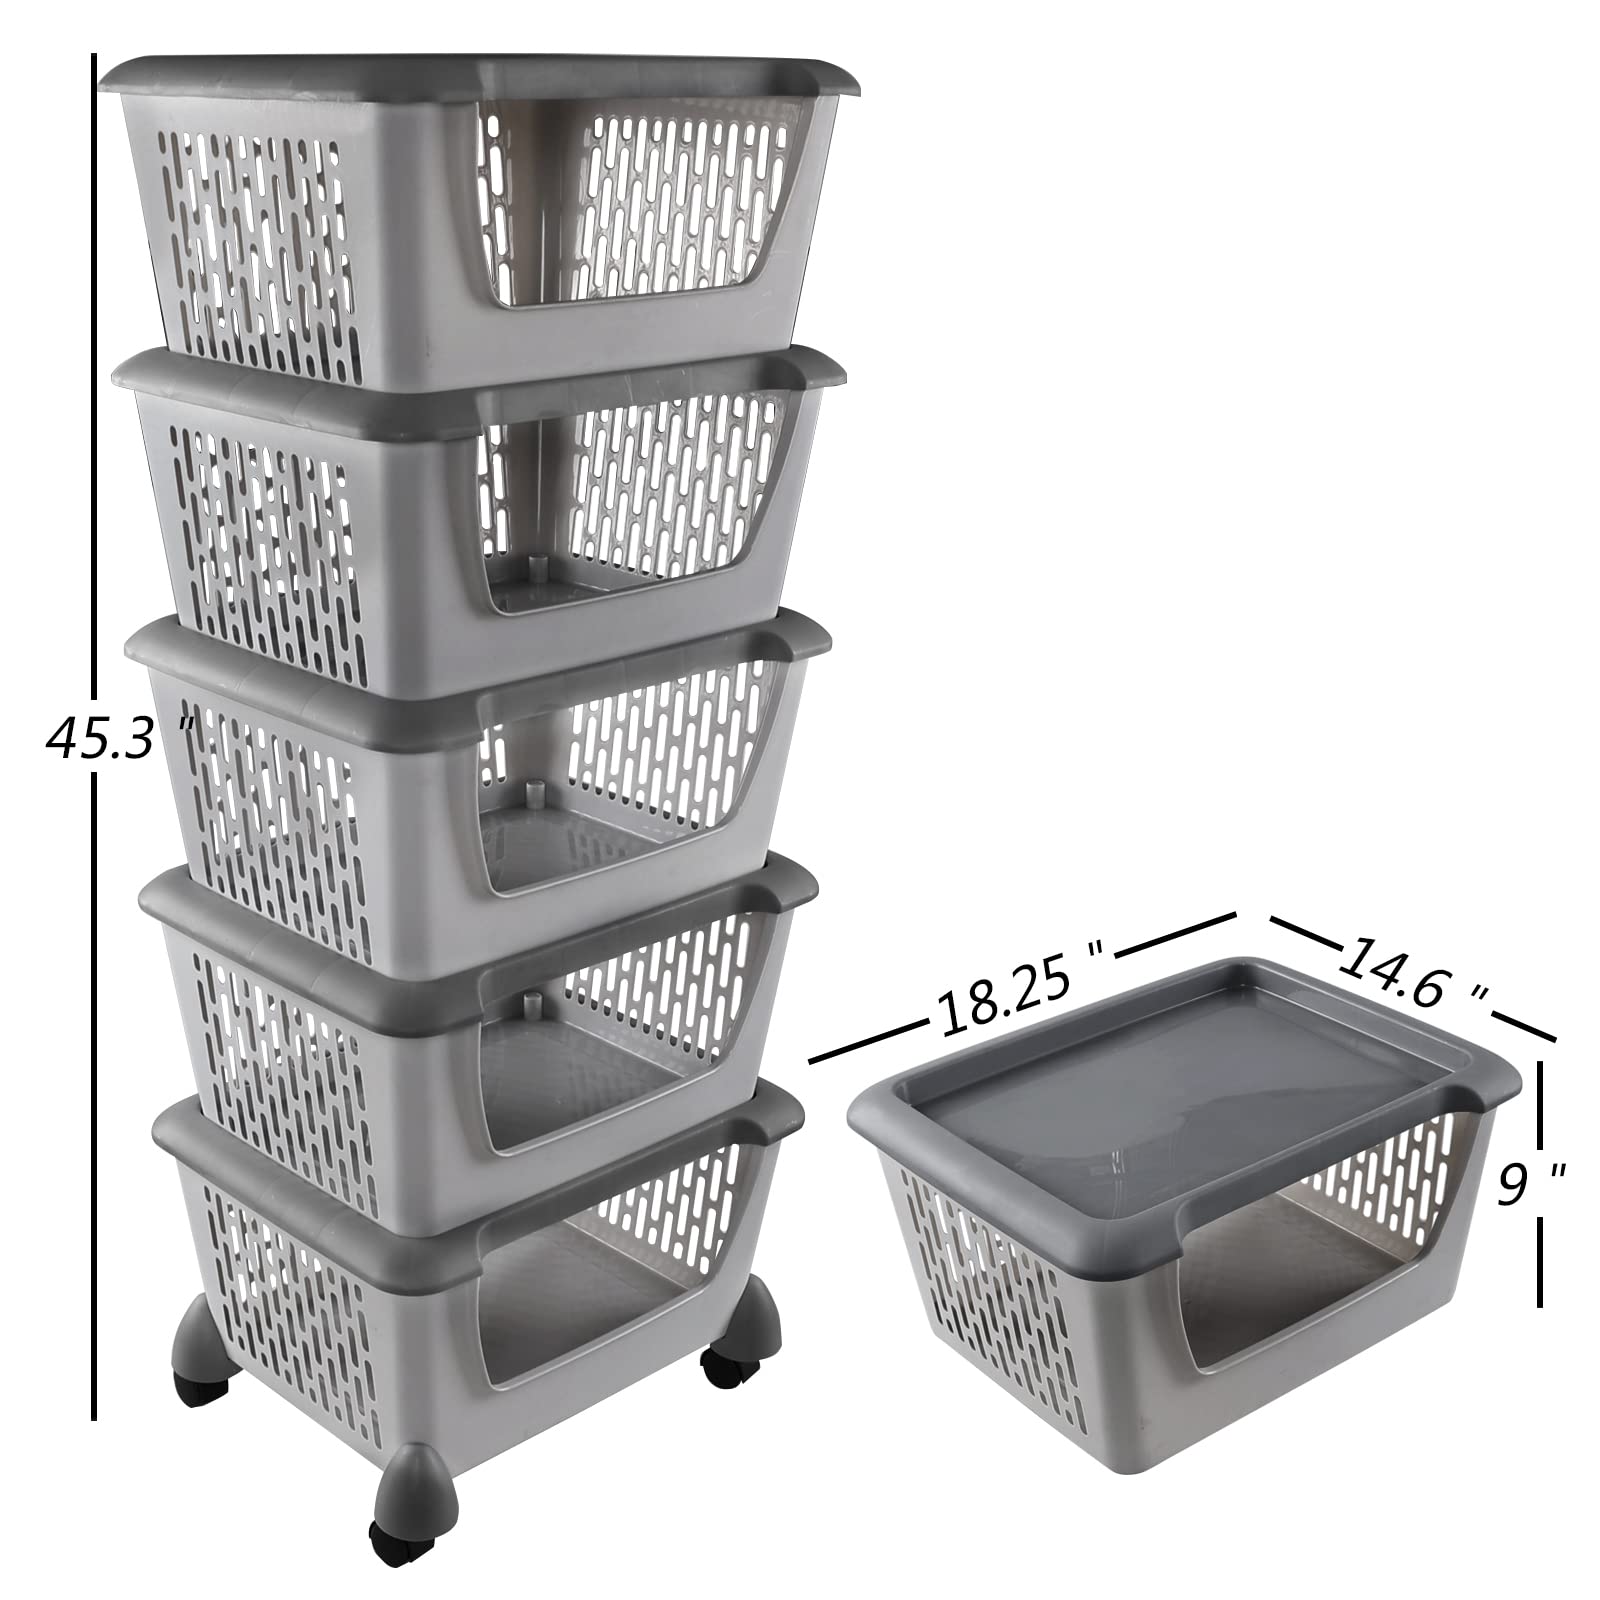 Yesdate 5-Pack Large Stackable Storage Bins, Plastci Stacking Baskets for Organizing Food